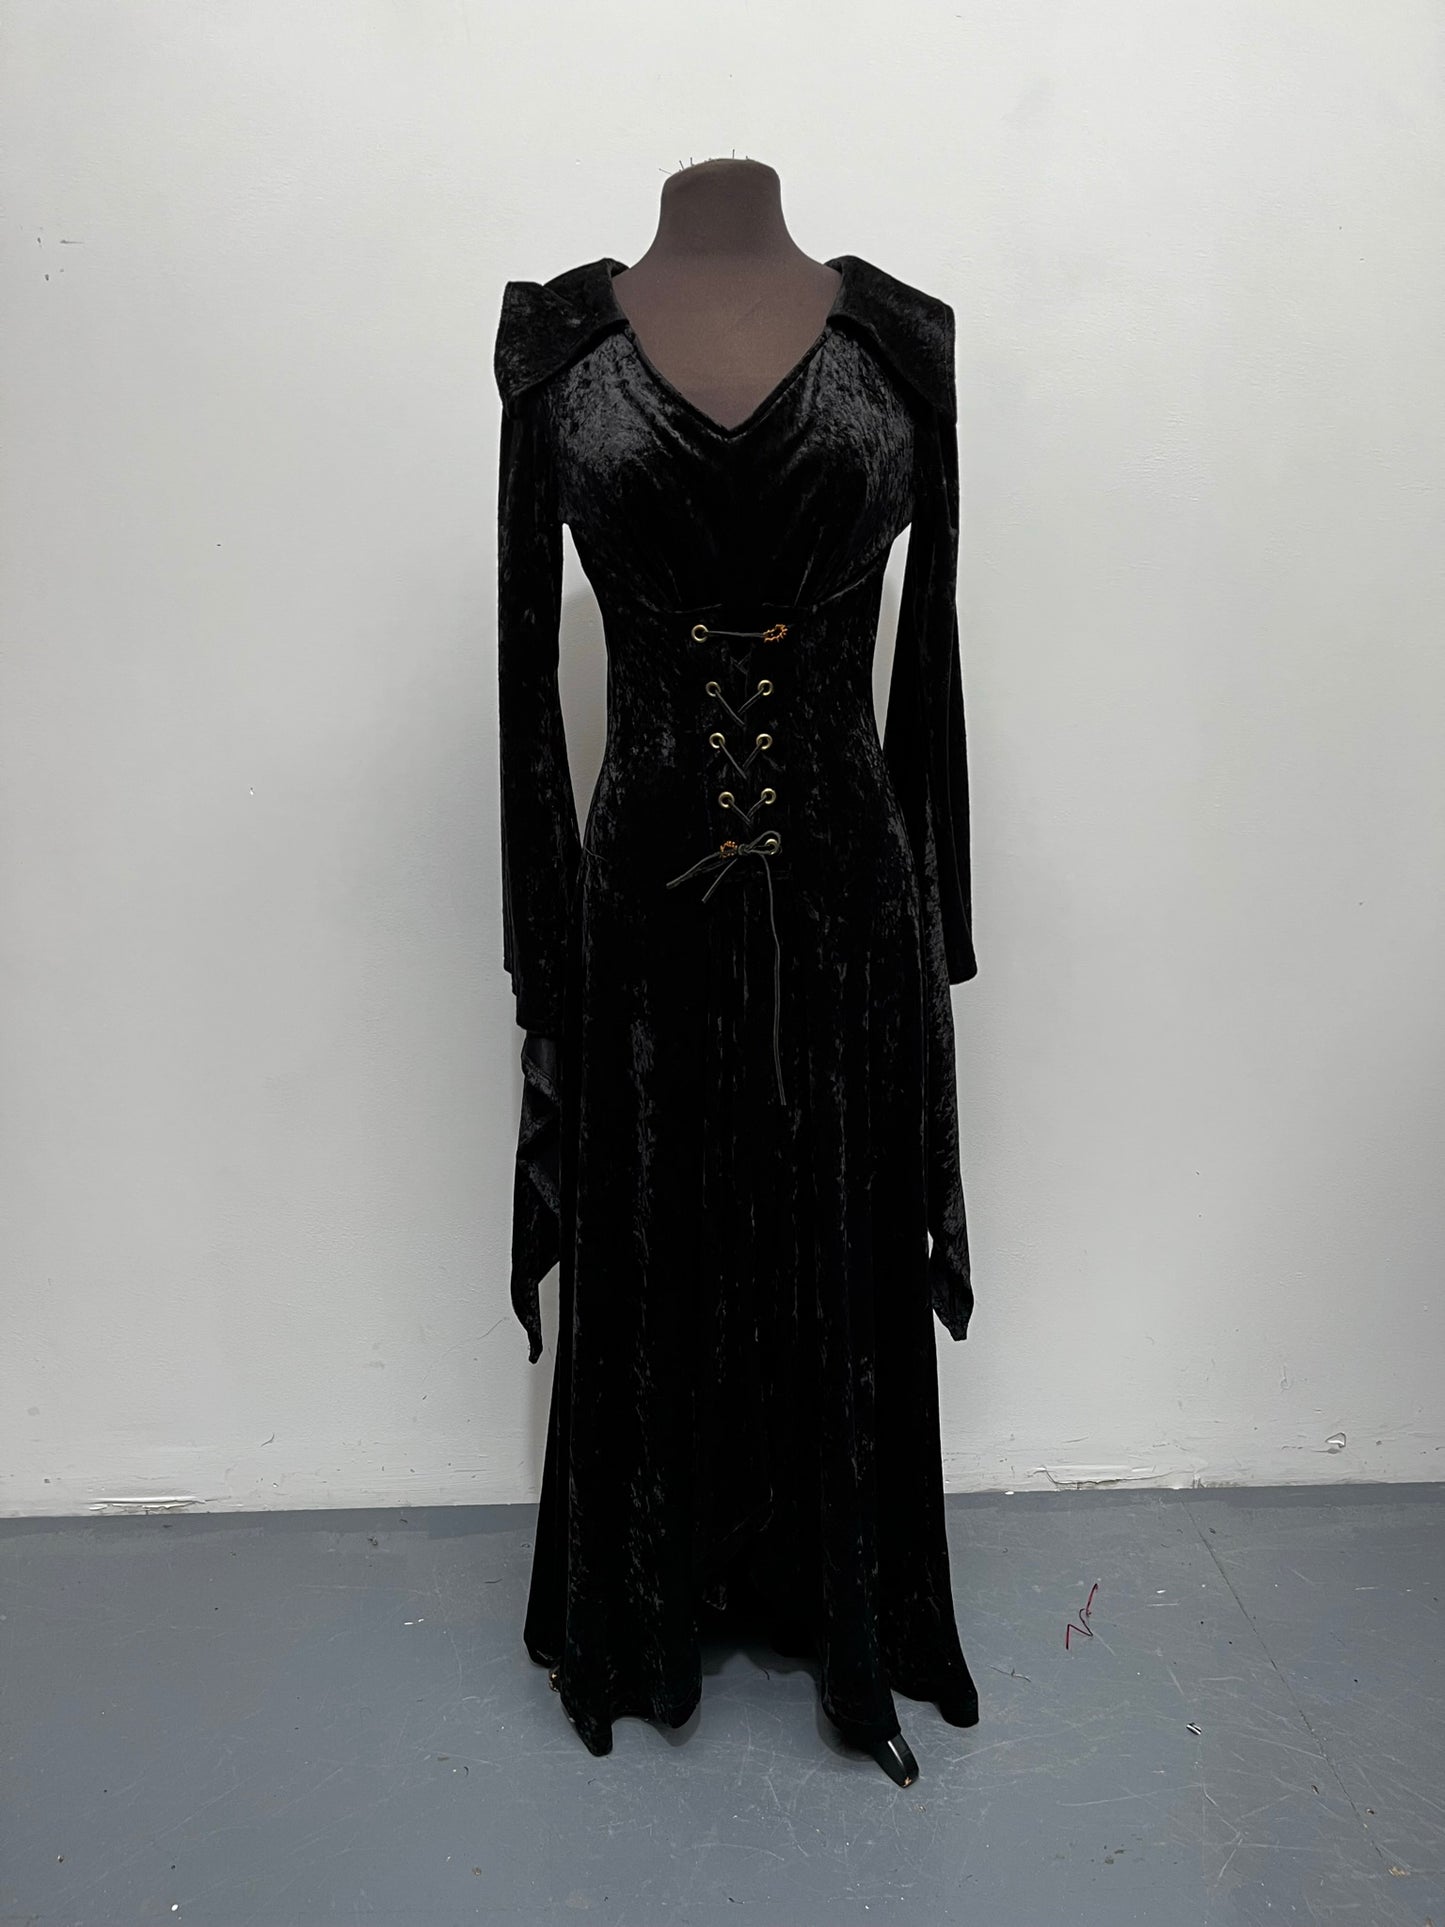 Black Vampire Dress Size S/M - Ex Hire Fancy Dress Costume Witch Medieval Gothic